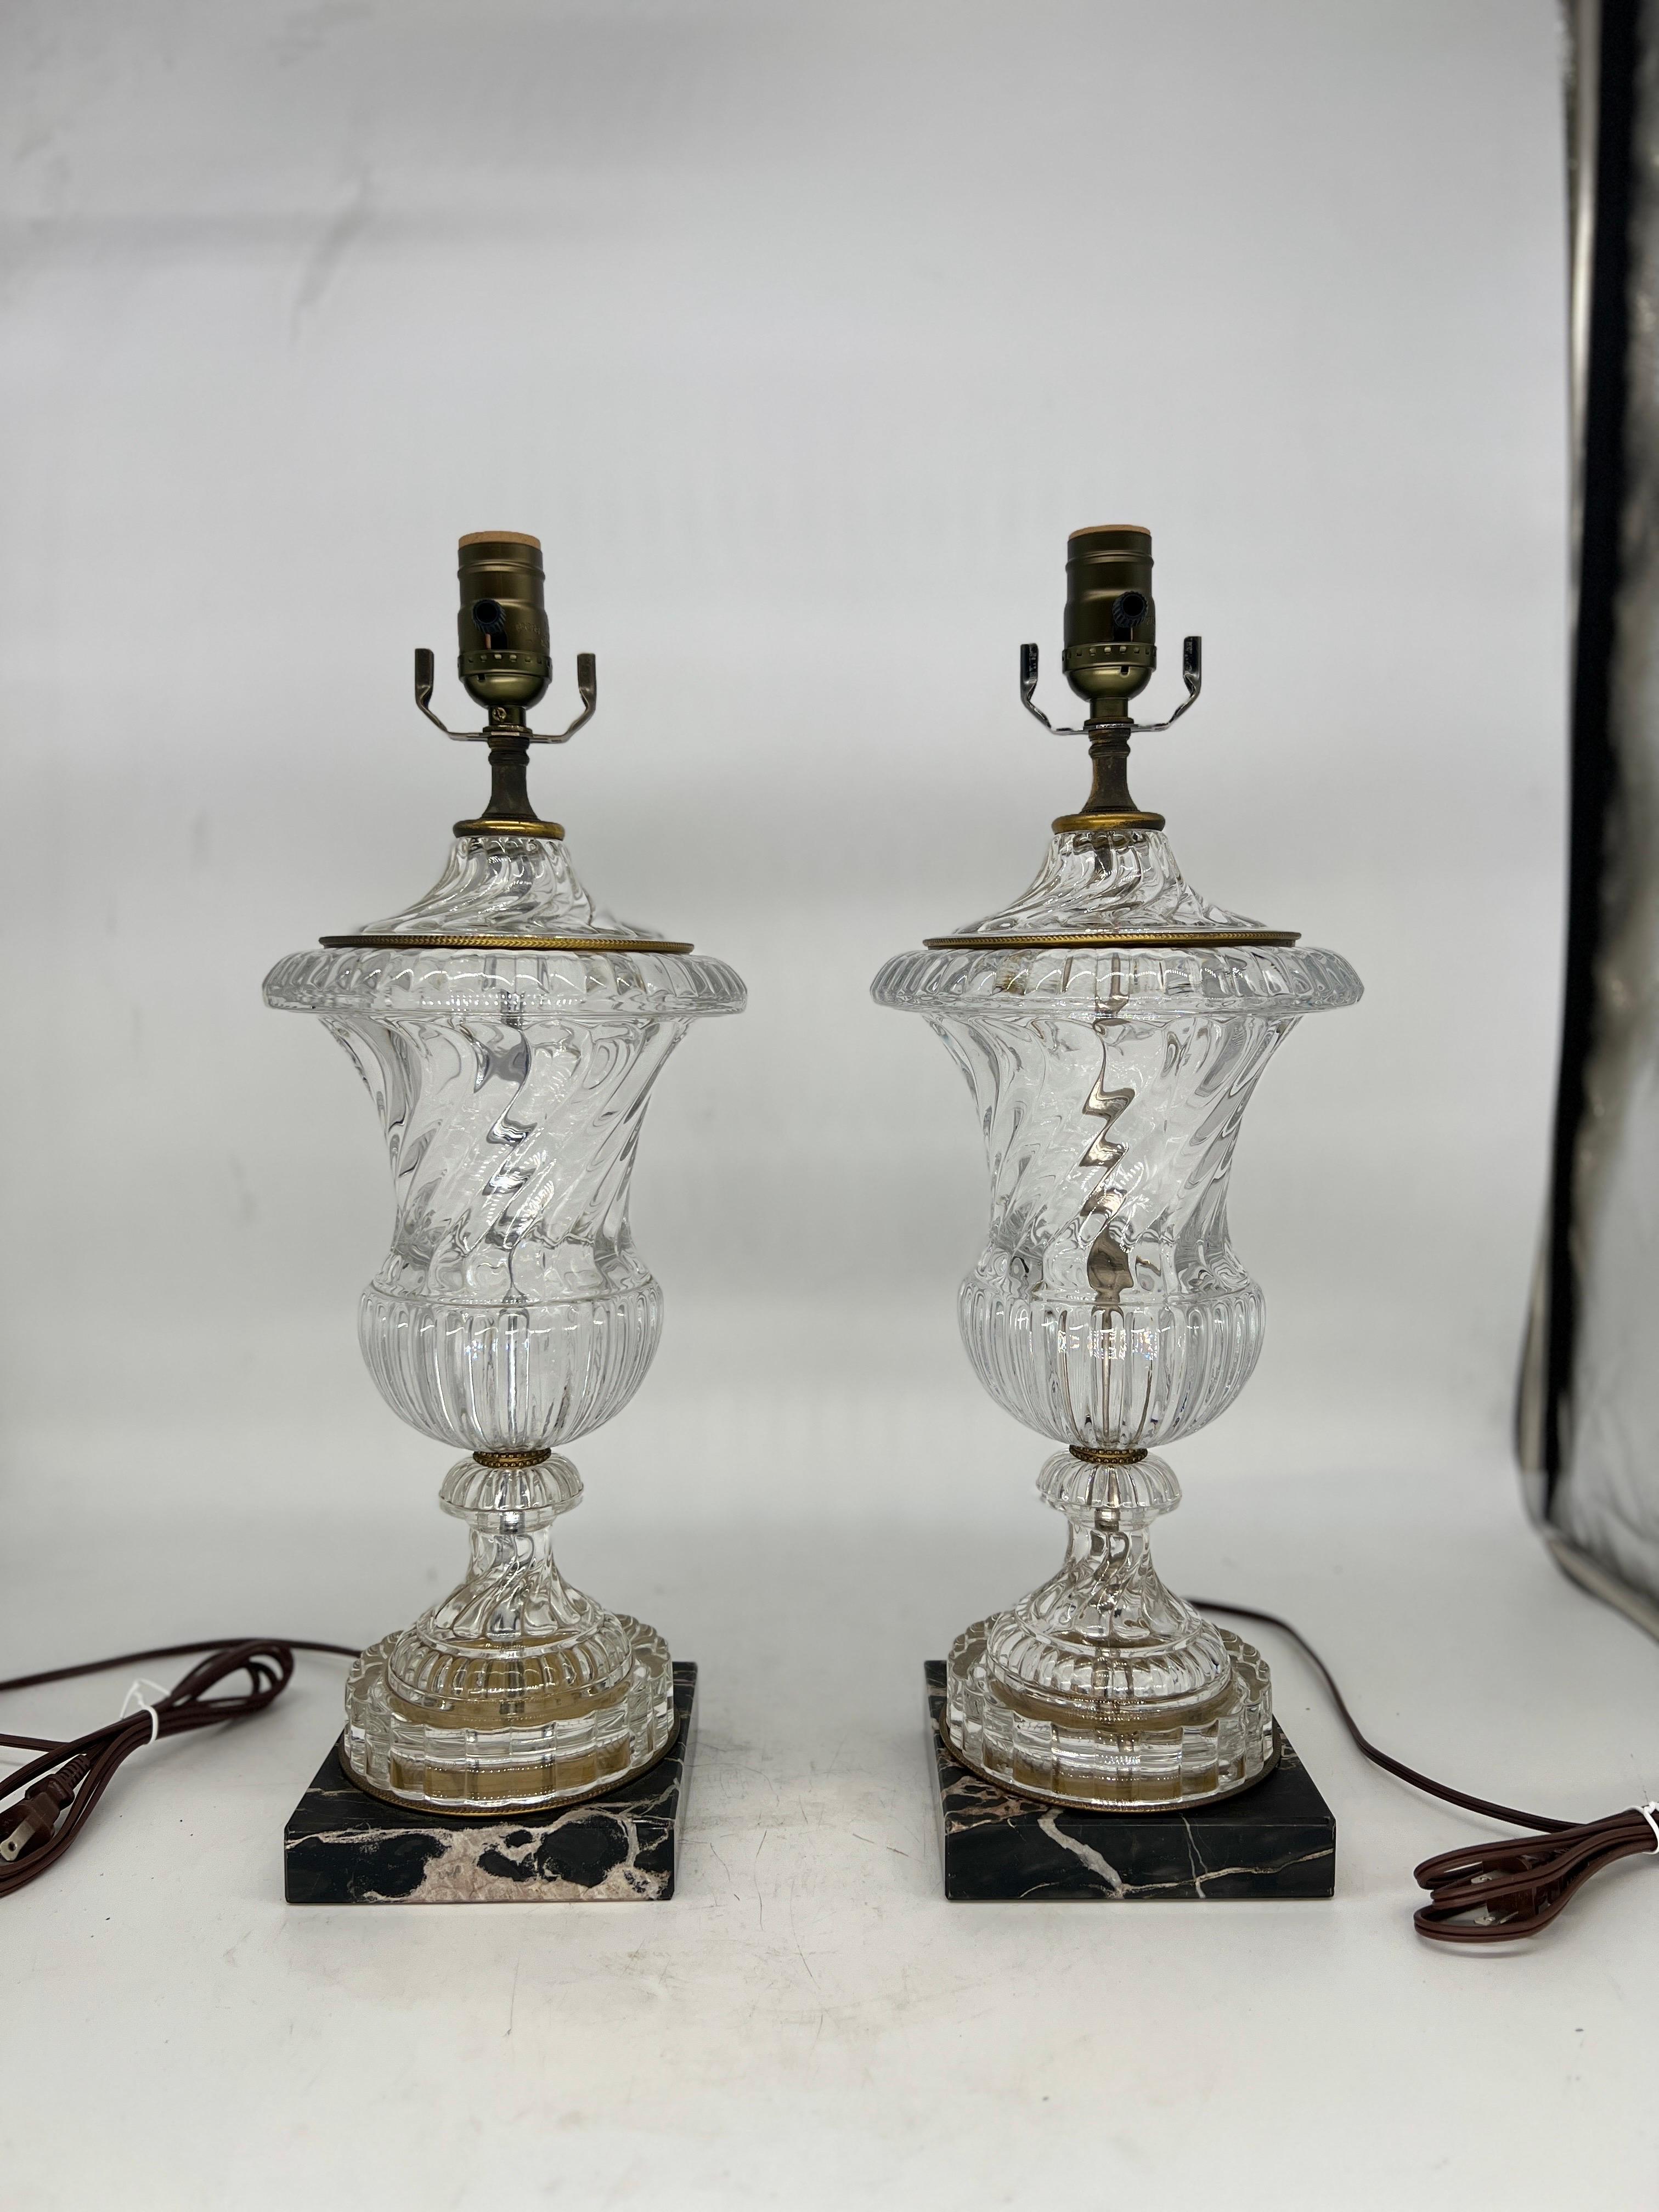 Paul Hanson, 20th century. 

Elevate your living space with this exquisite pair of Paul Hanson Baccarat style table lamps, expertly crafted to harmonize opulent design with timeless elegance. These lamps exude a luxurious aura through their